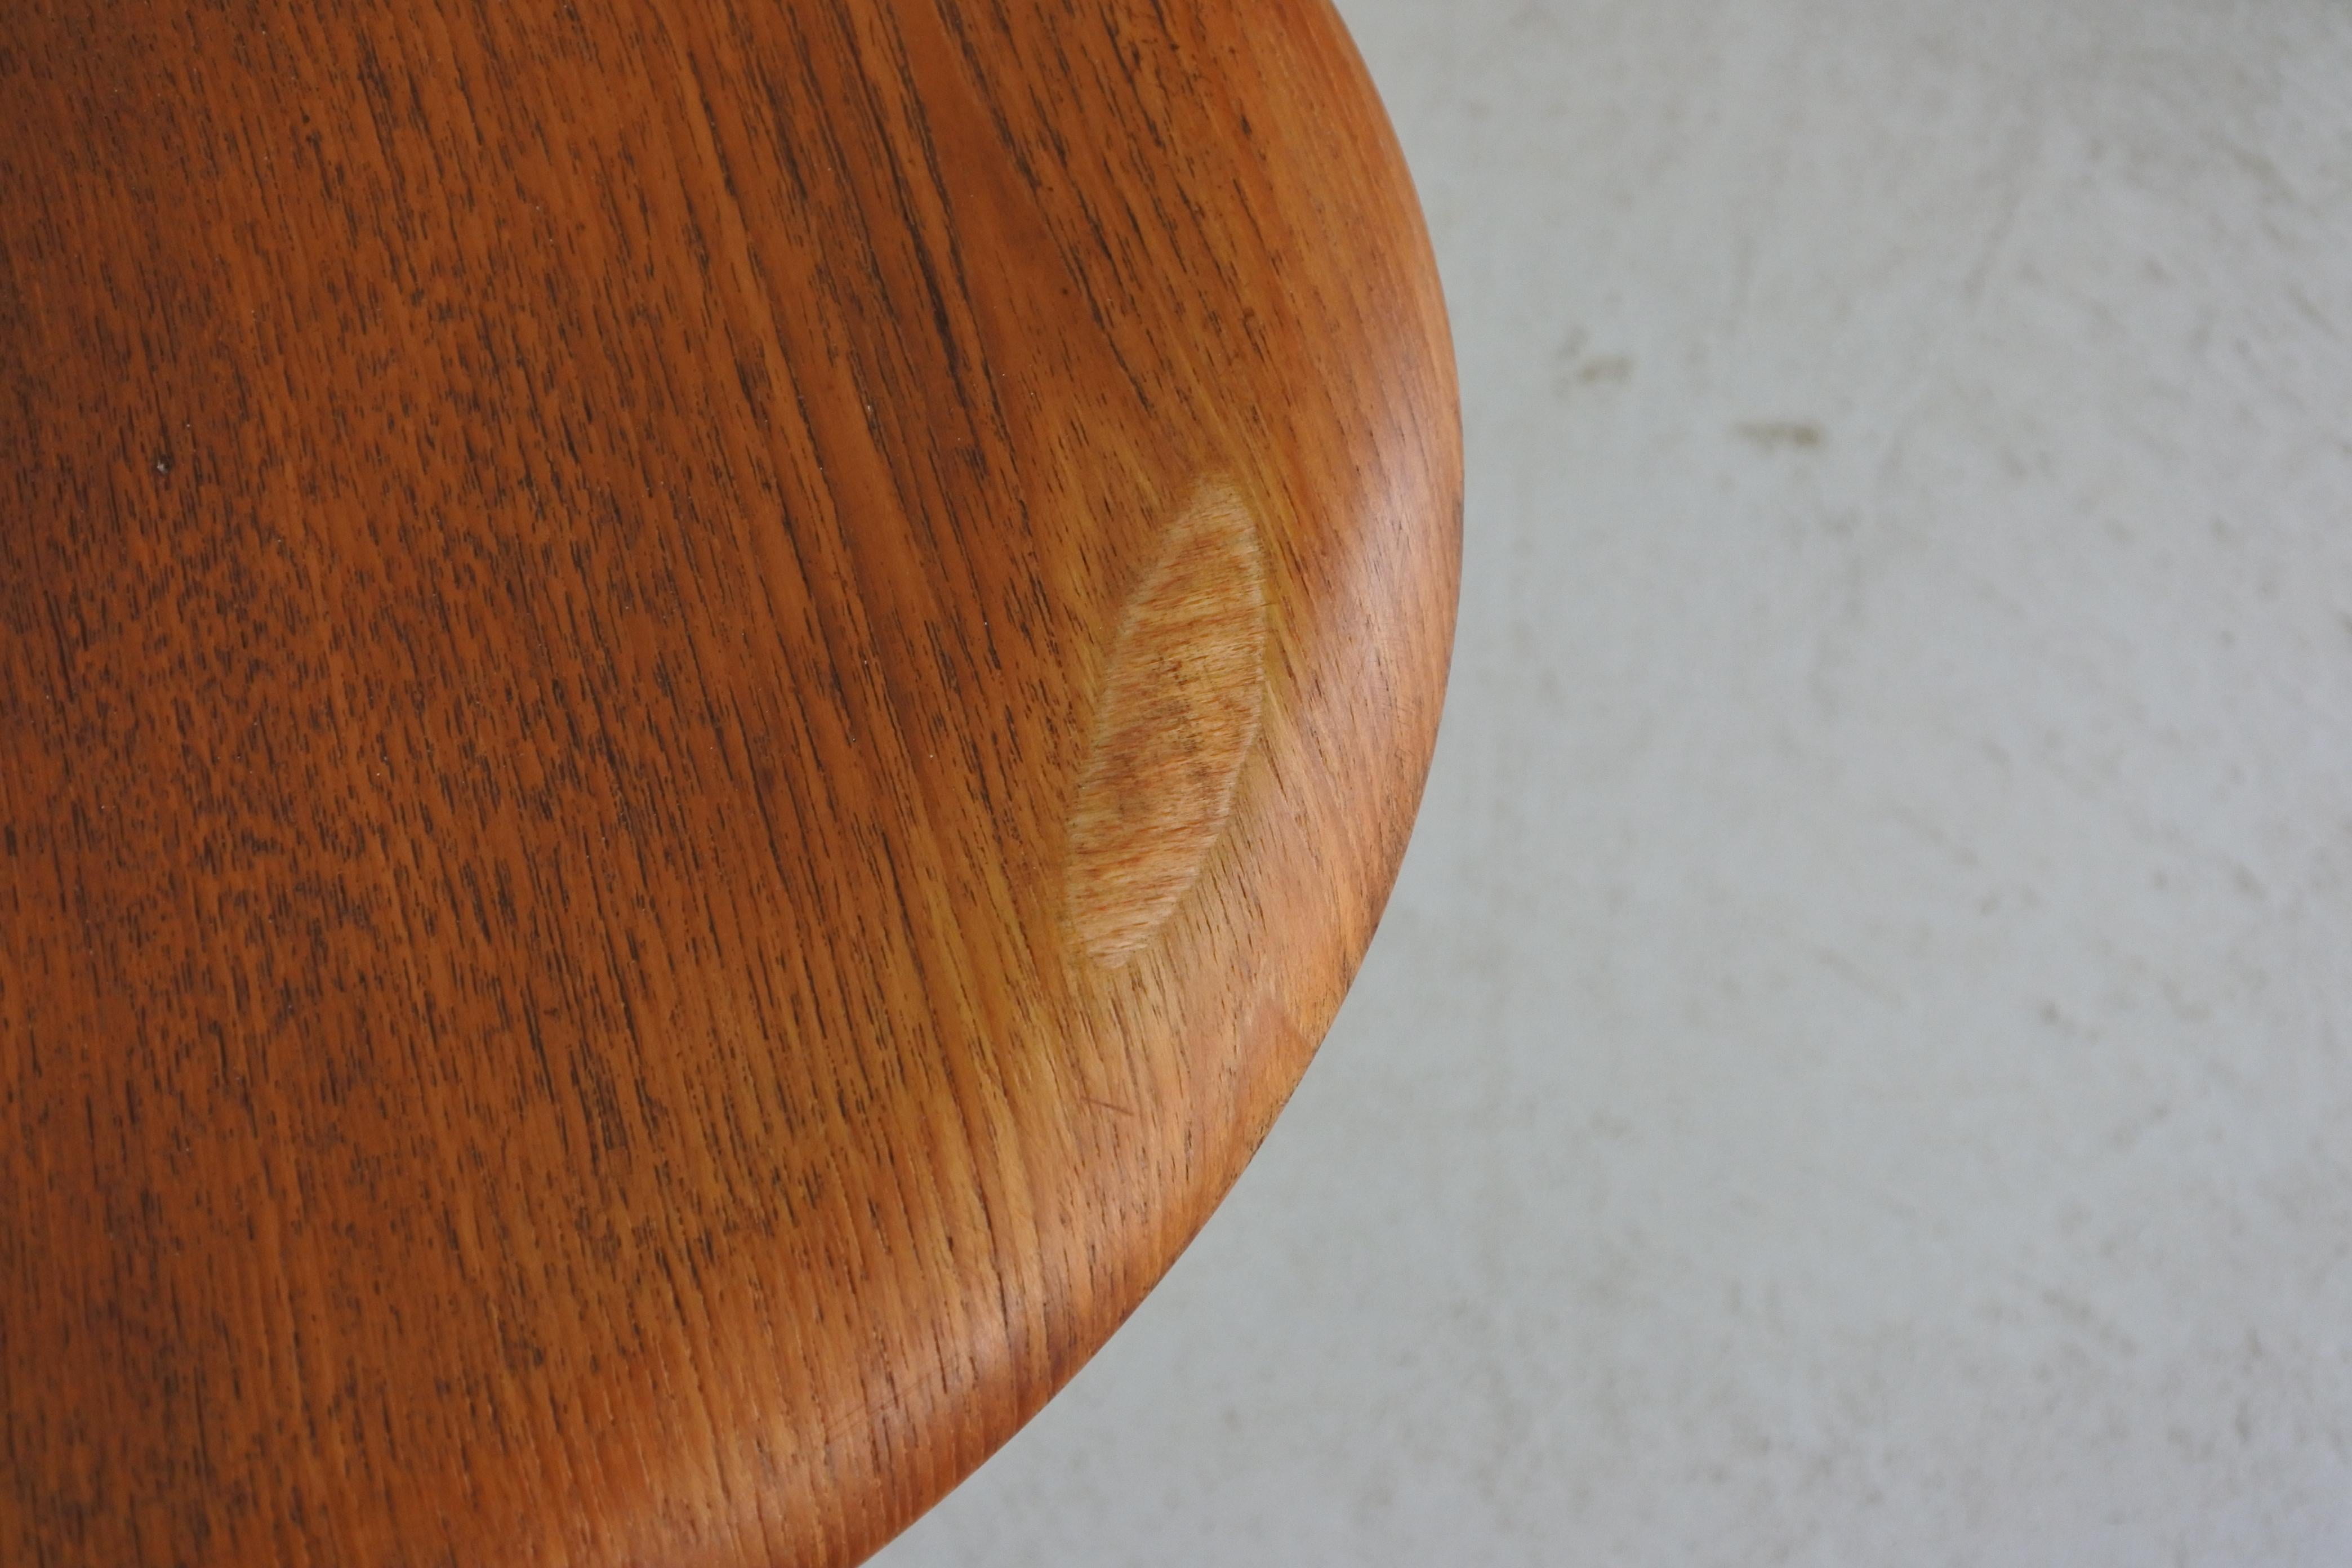 Early Tripod Dot Stool by Fritz Hansen, Teak and Plated Copper, Denmark 1960s For Sale 2